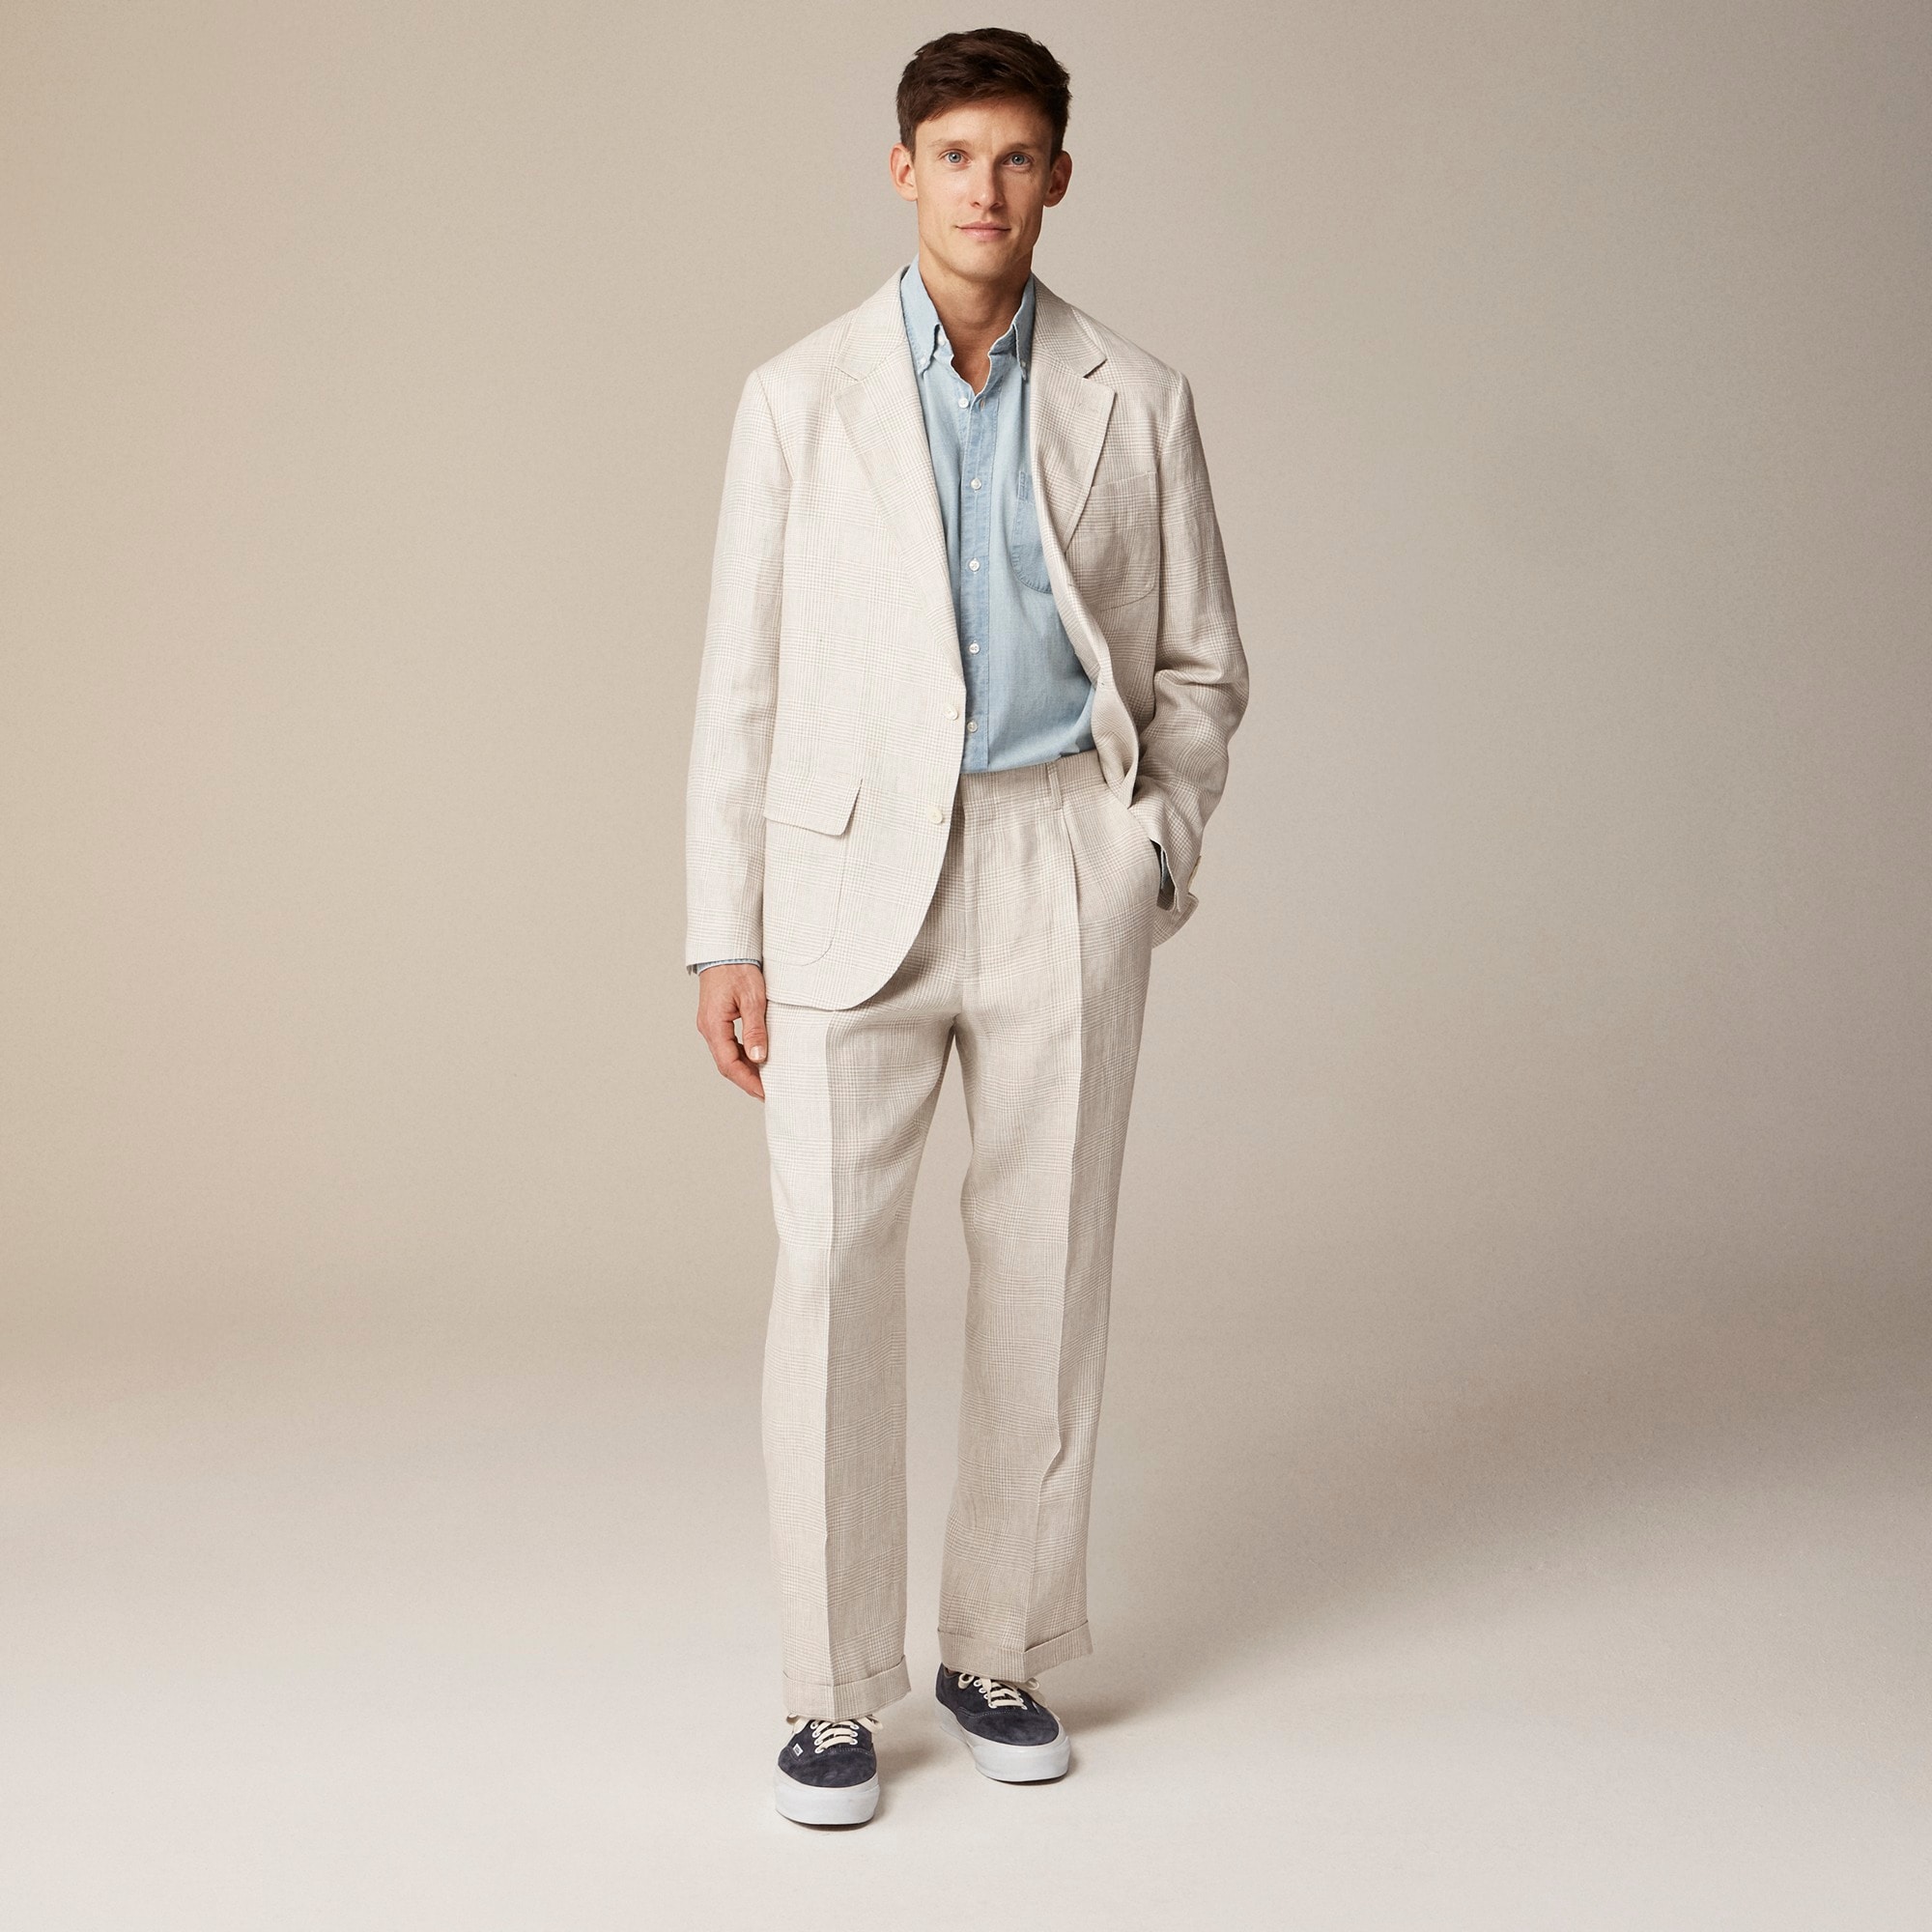 j.crew: big-fit unstructured suit jacket in linen twill plaid for men